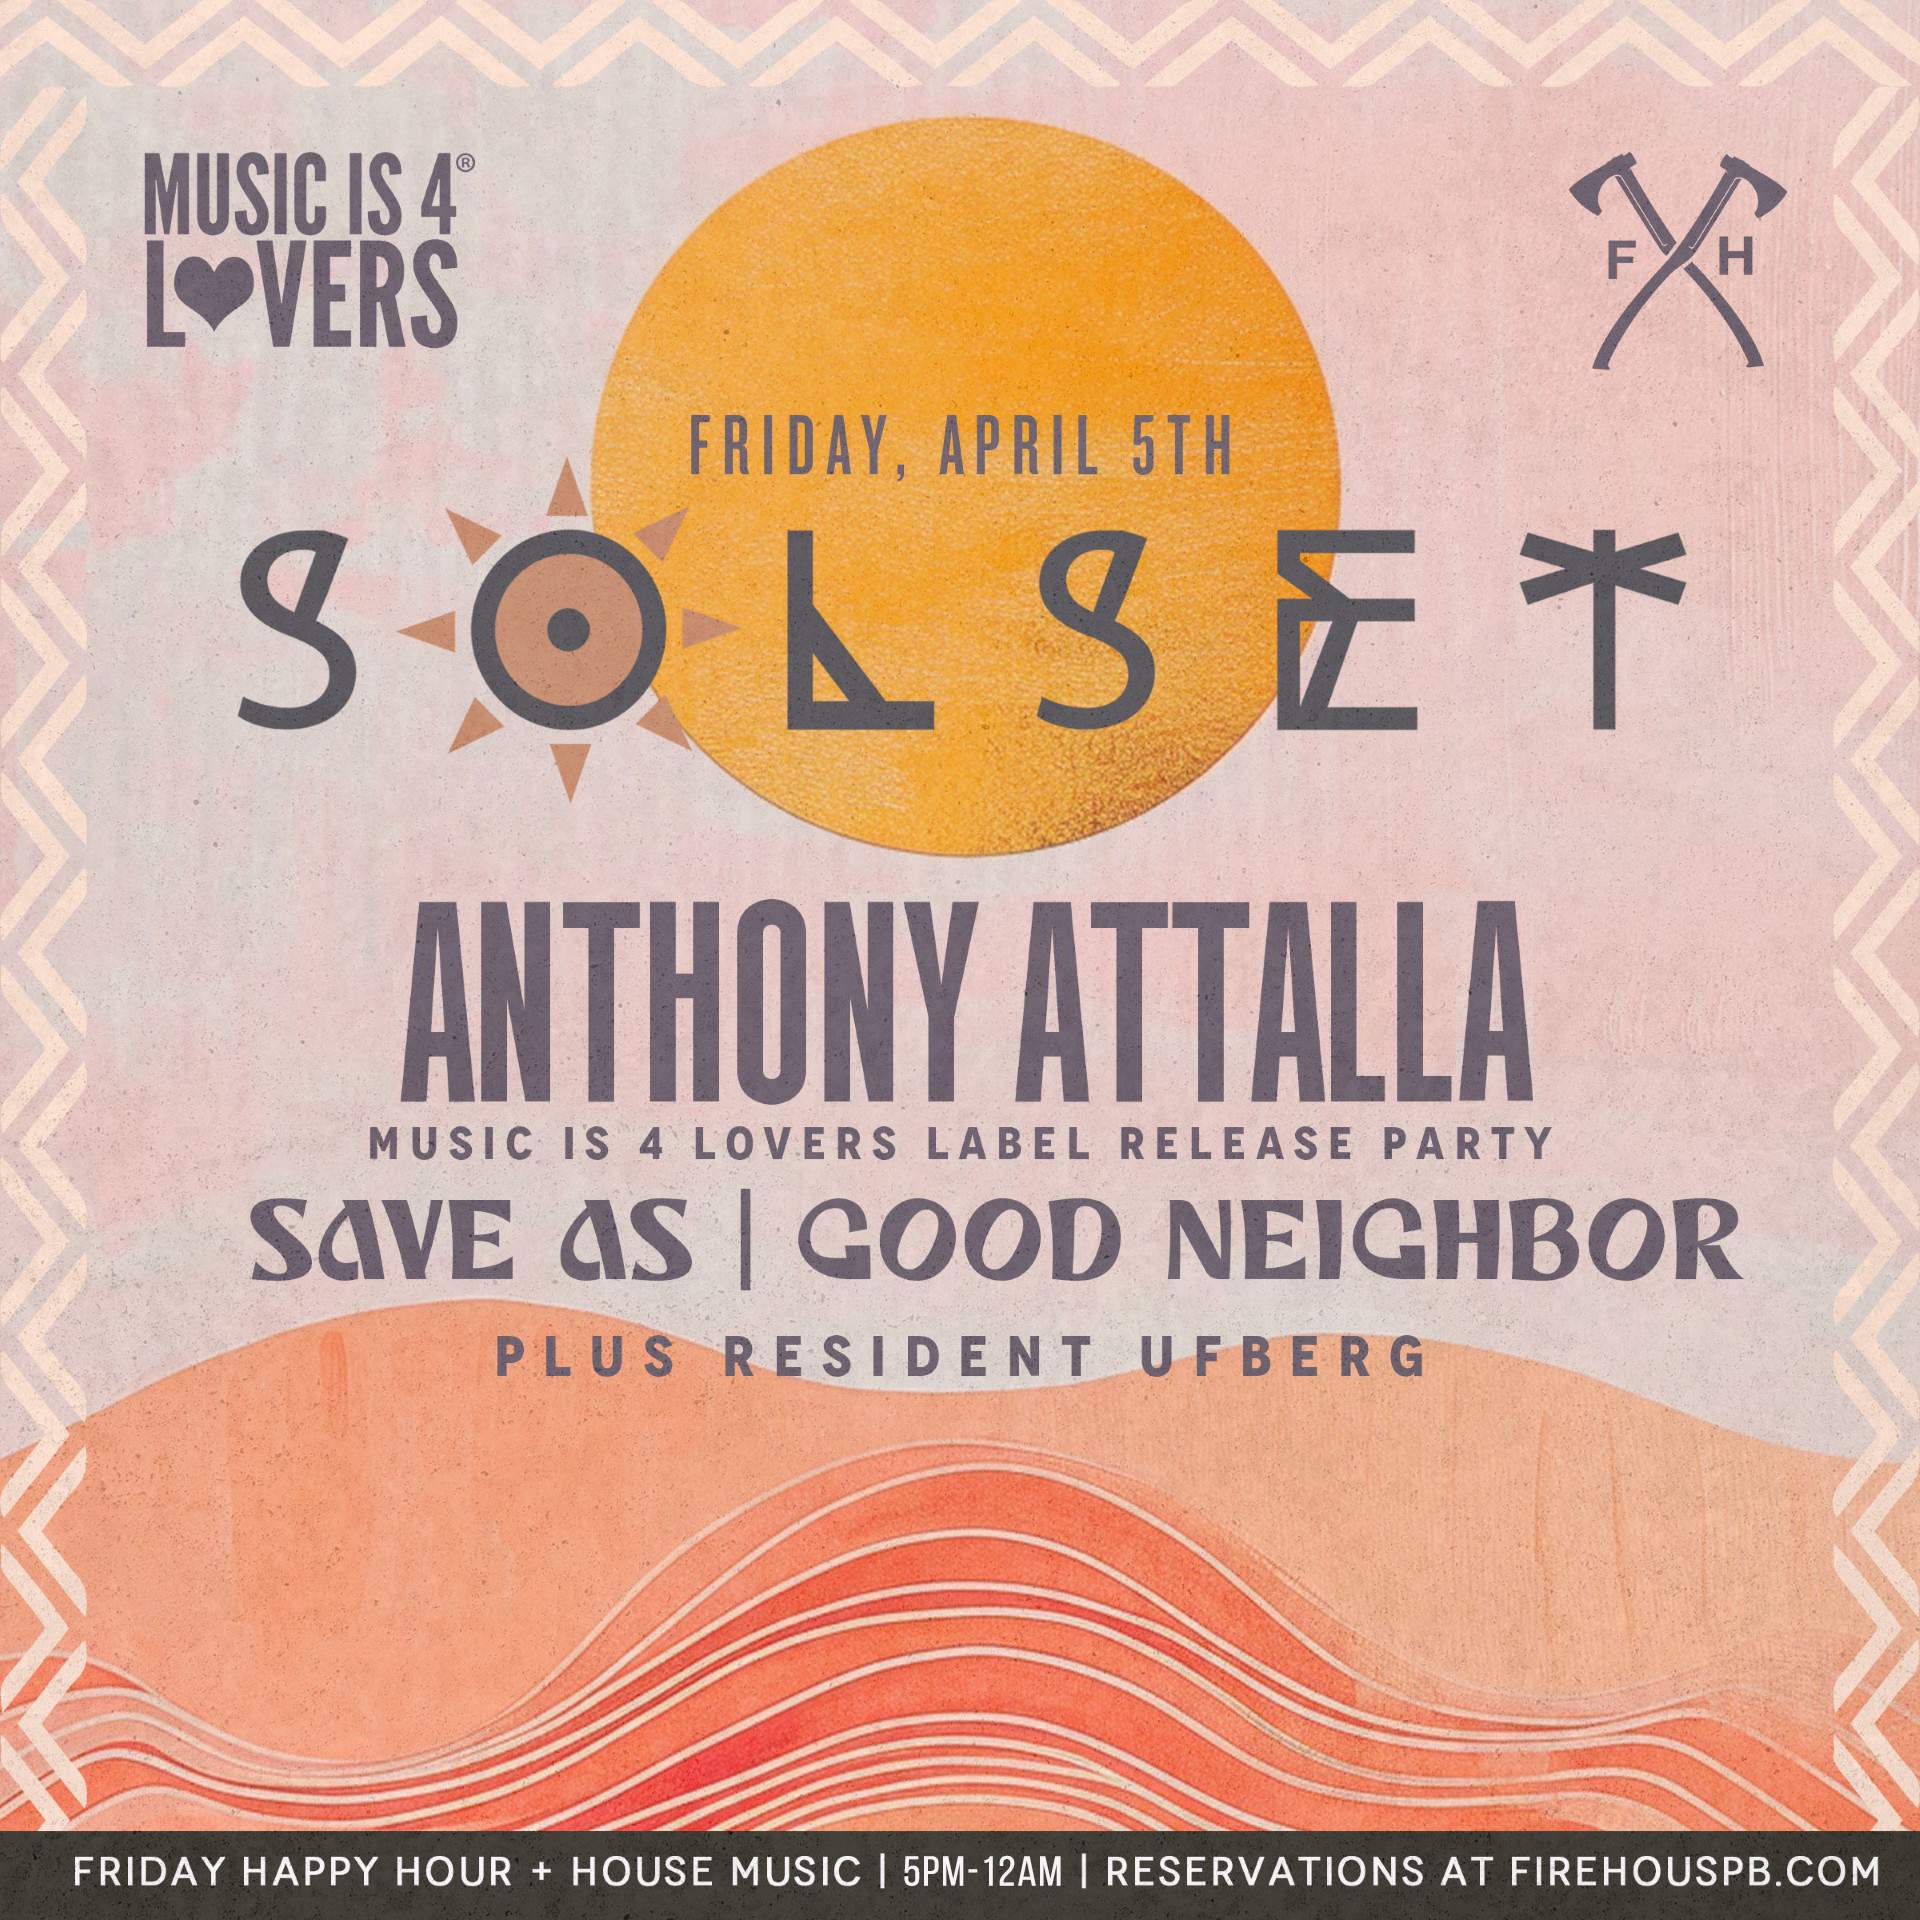 Anthony Attalla [Music is 4 Lovers Label Release Party] at Firehouse - NO COVER - フライヤー表